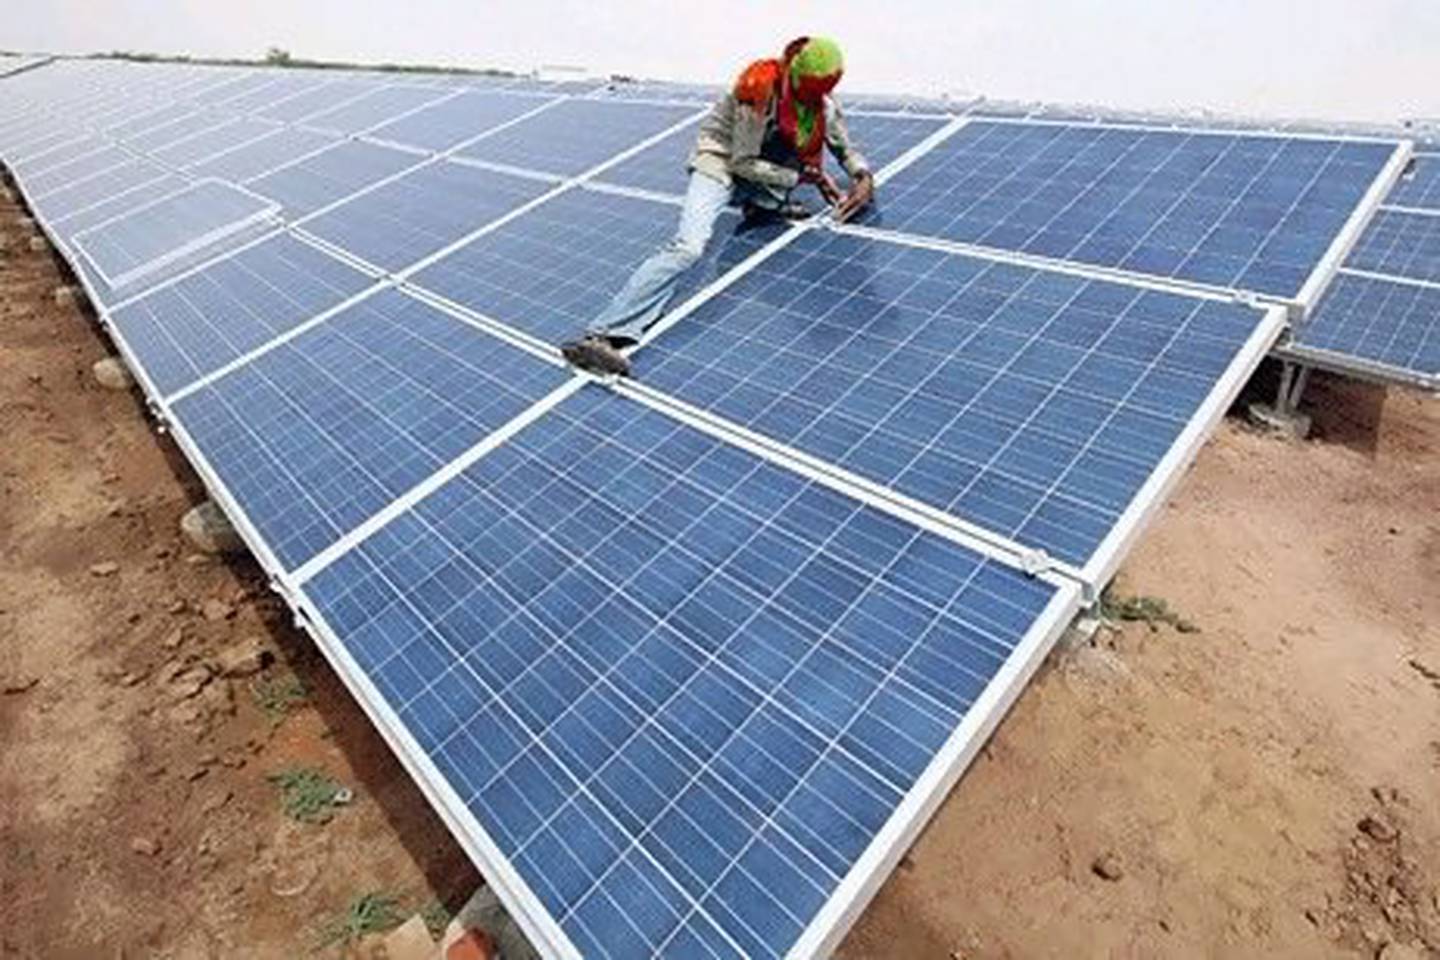 Saudi Arabia's plans to produce a third of its electricity from solar power may revitalise the industry. Above, a worker installs photovoltaic solar panels at the Gujarat solar park in India. Reuters